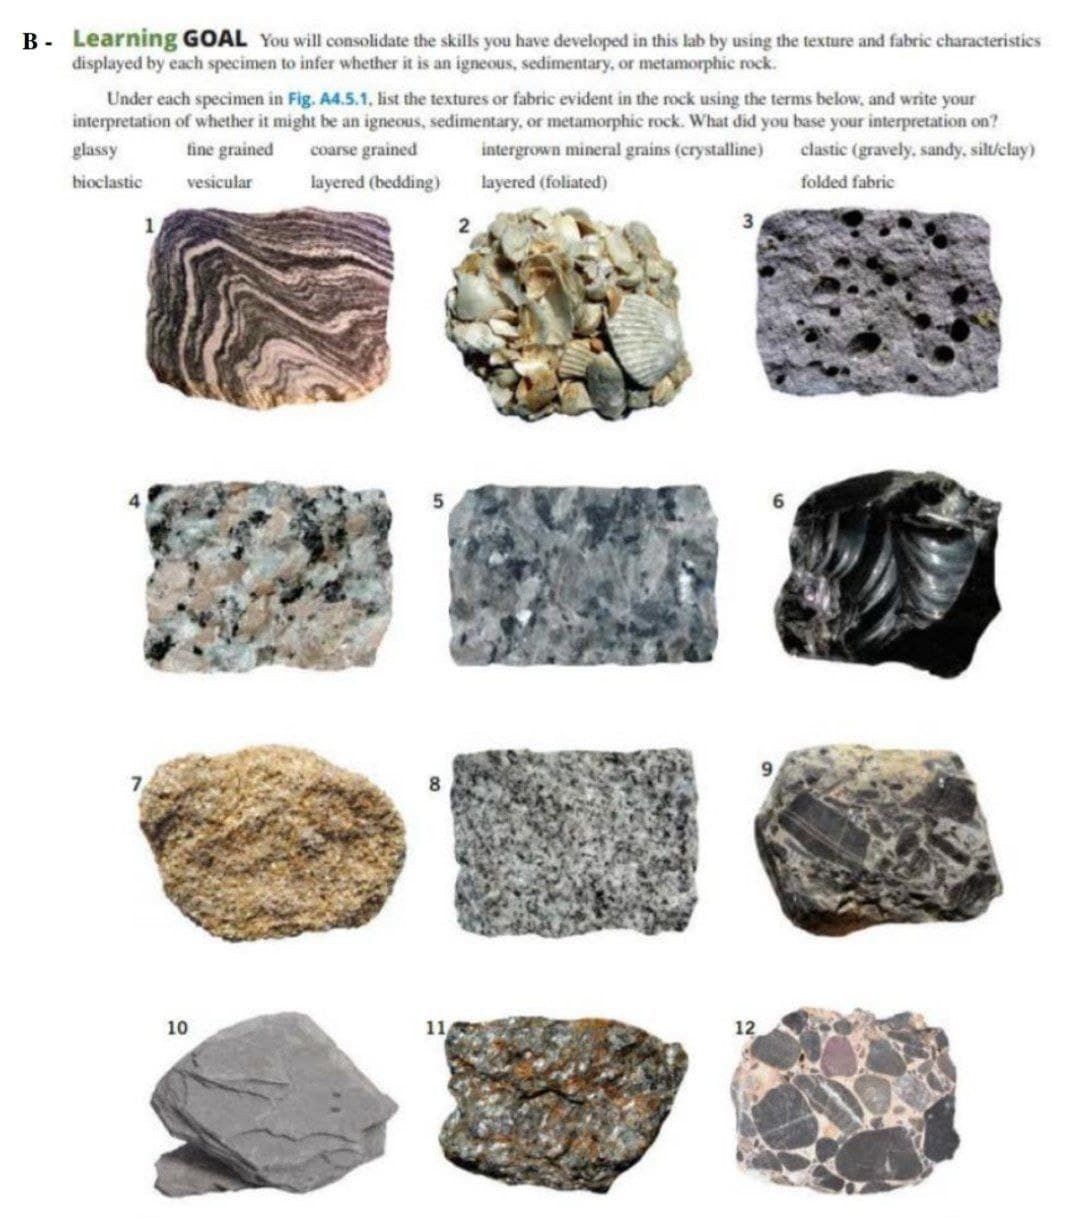 B - Learning GOAL You will consolidate the skills you have developed in this lab by using the texture and fabric characteristies
displayed by each specimen to infer whether it is an igneous, sedimentary, or metamorphic rock.
Under each specimen in Fig. A4.5.1, list the textures or fabric evident in the rock using the terms below, and write your
interpretation of whether it might be an igneous, sedimentary, or metamorphic rock. What did you base your interpretation on?
glassy
fine grained
coarse grained
intergrown mineral grains (crystalline)
clastic (gravely, sandy, silt/clay)
bioclastic
vesicular
layered (bedding)
layered (foliated)
folded fabric
8
10
11
12
